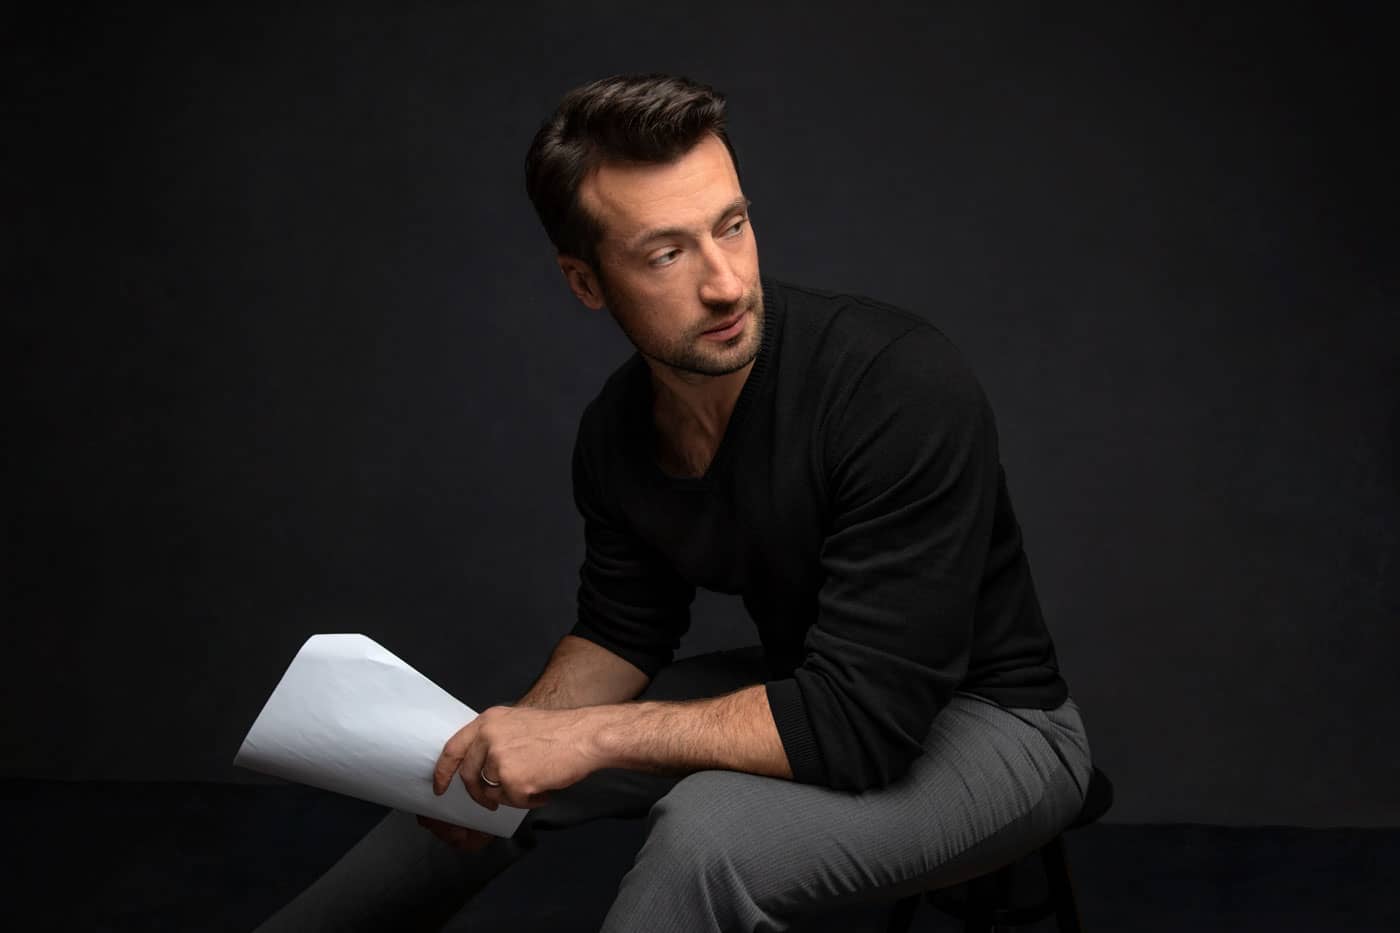 Photo of handsome actor with black shirt and gray pants. He's sitting and working on his lines holding the script. Personal branding photography.